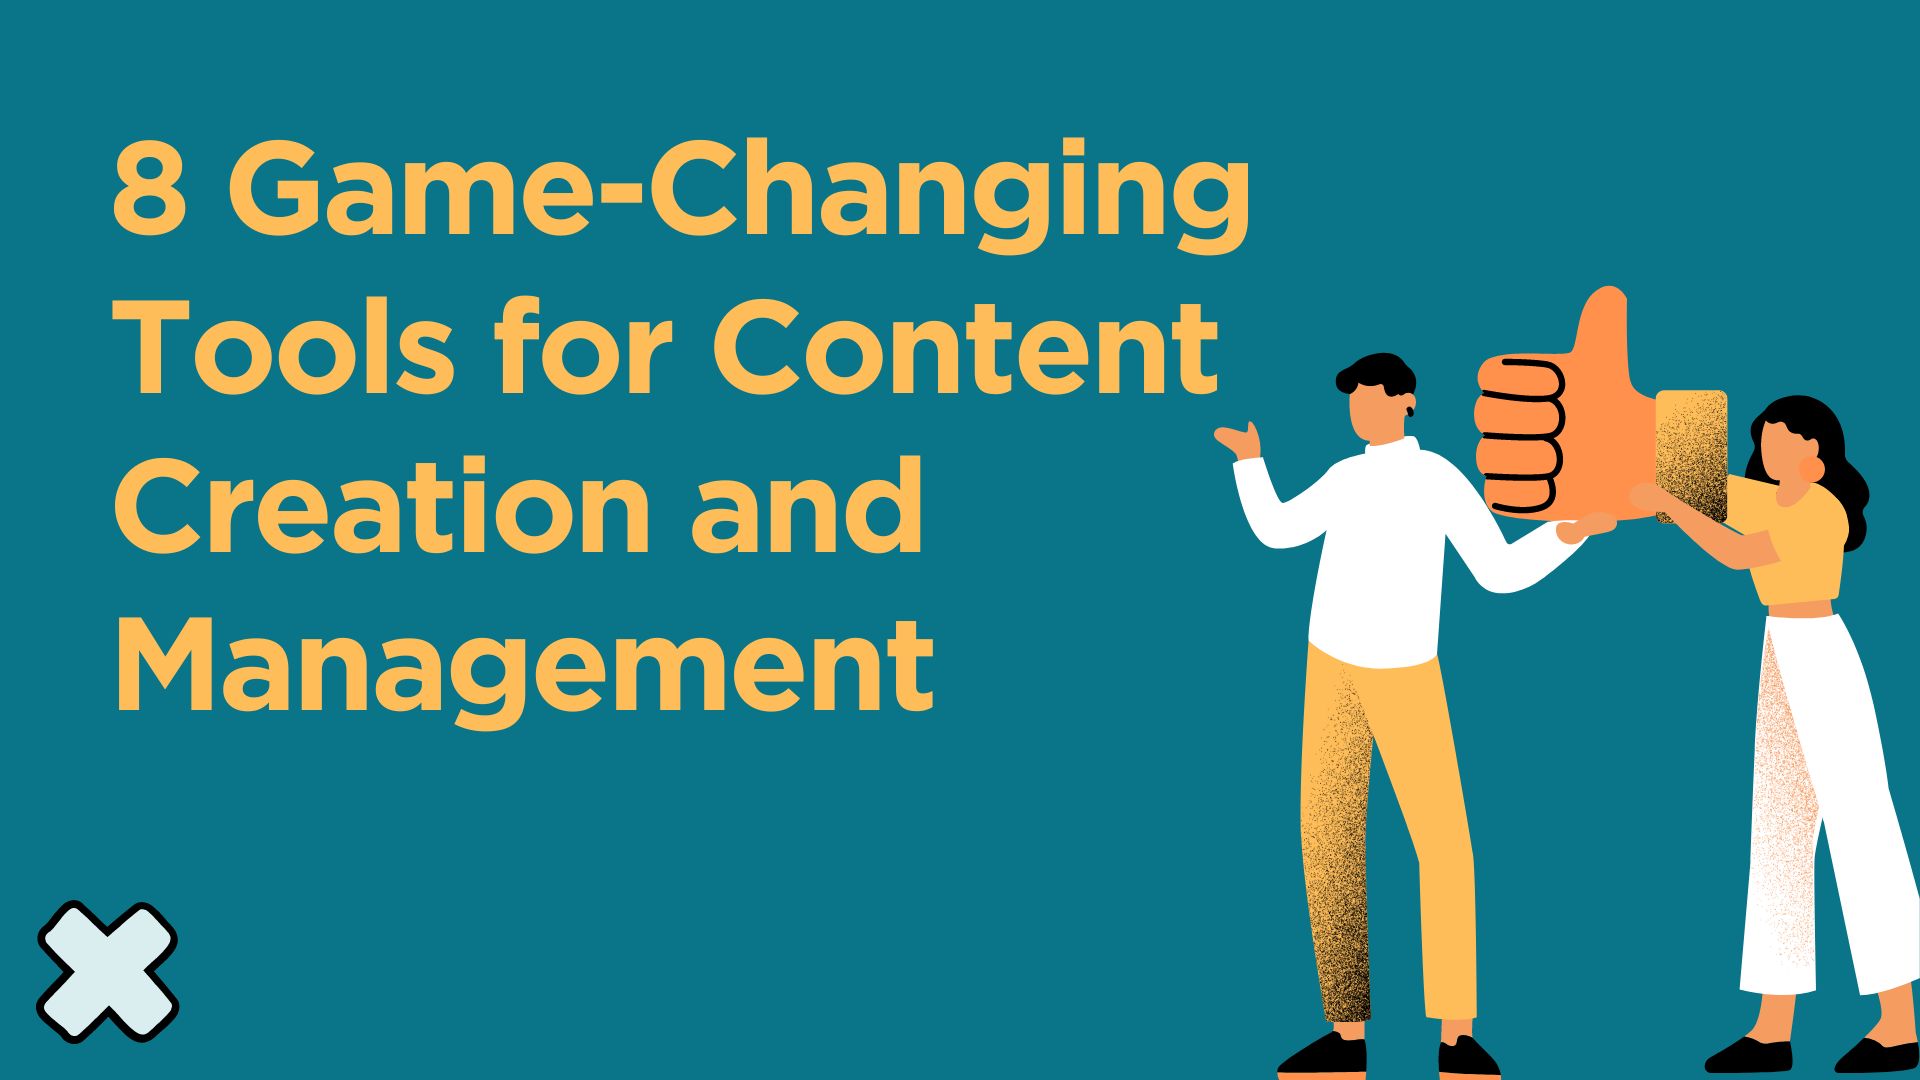 8 Game-Changing Tools for Content Creation and Management